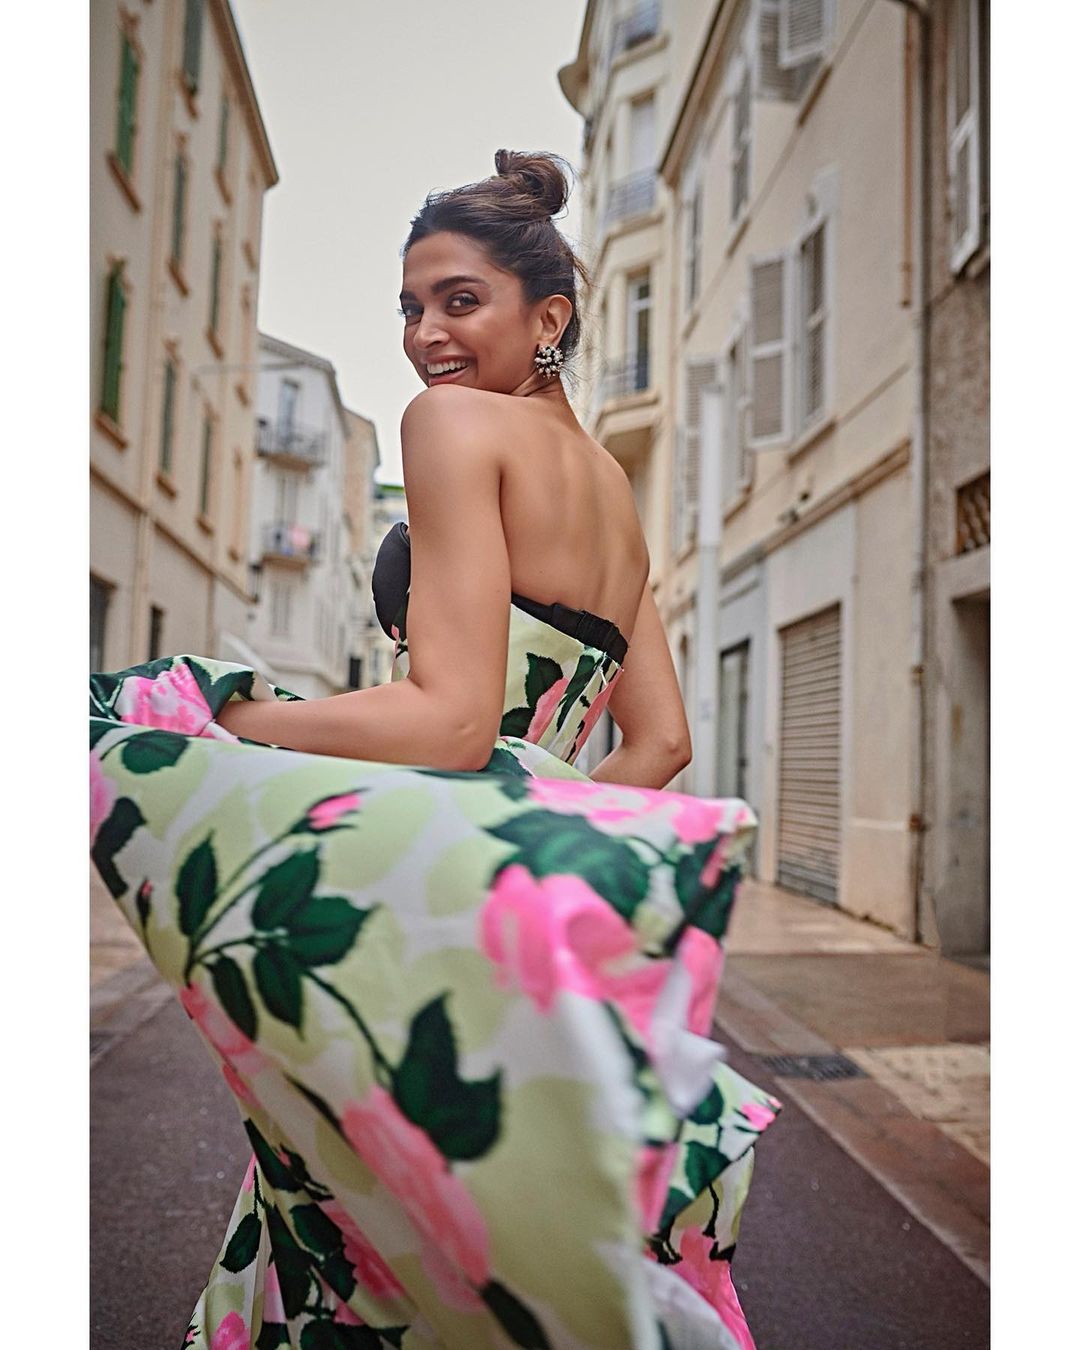 Cannes 2022: Deepika Padukone dazzles in her Day 5 outdoor shoots - News